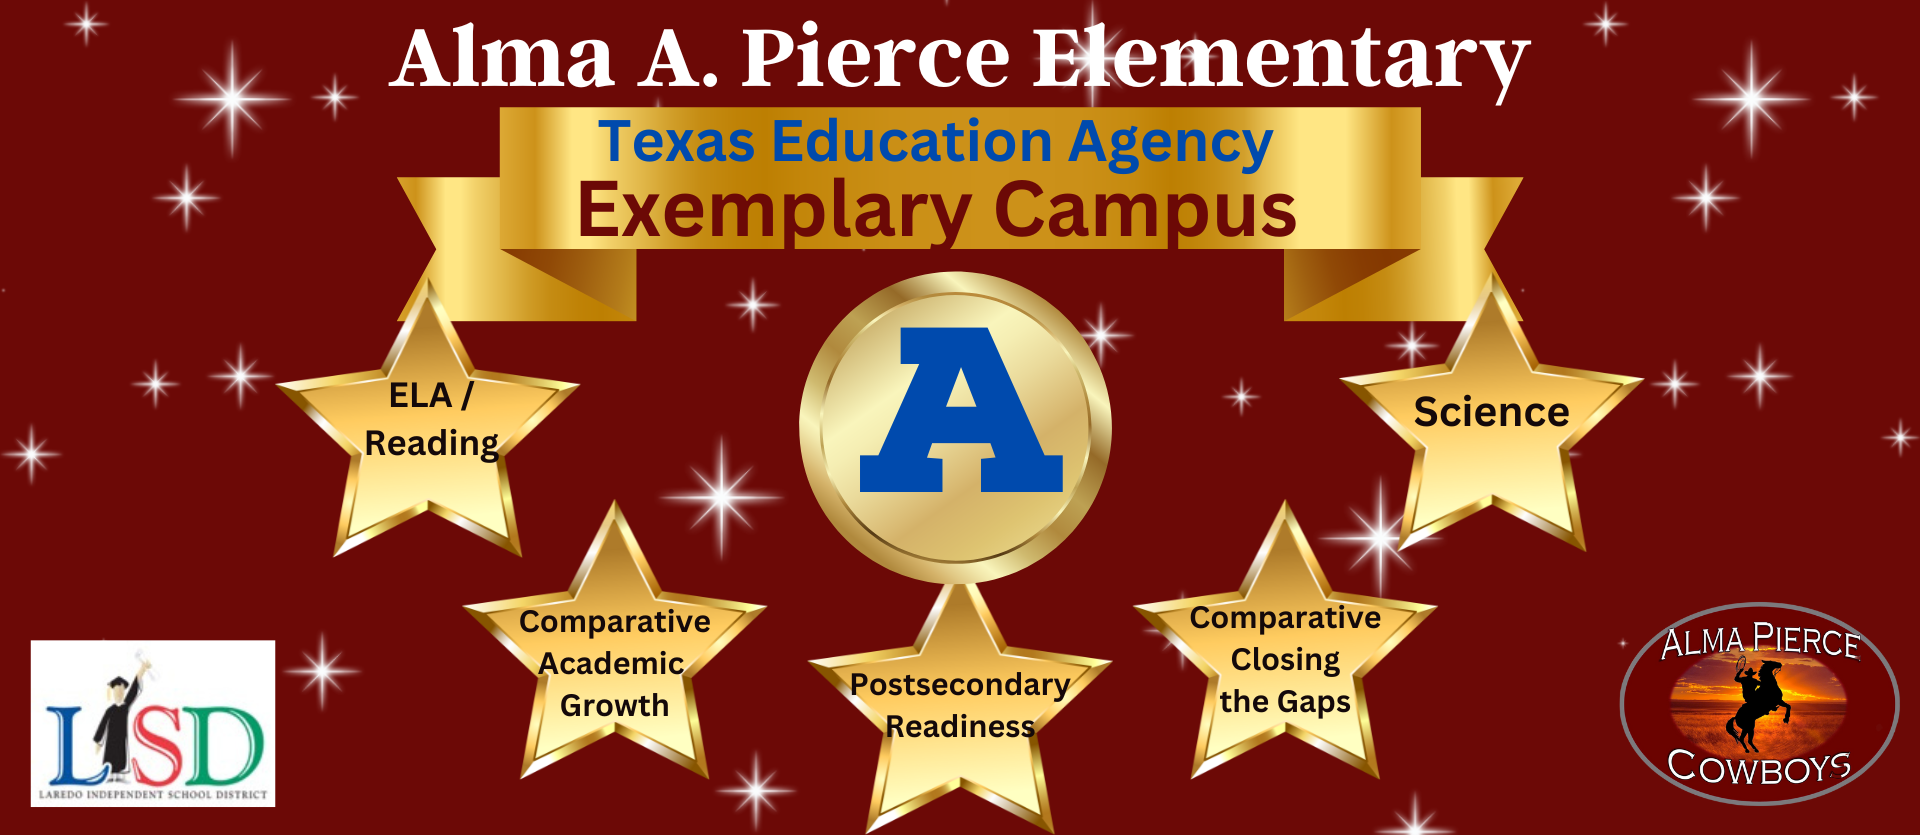 Alma Pierce Elementary is an A Rated TEA Exemplary Campus